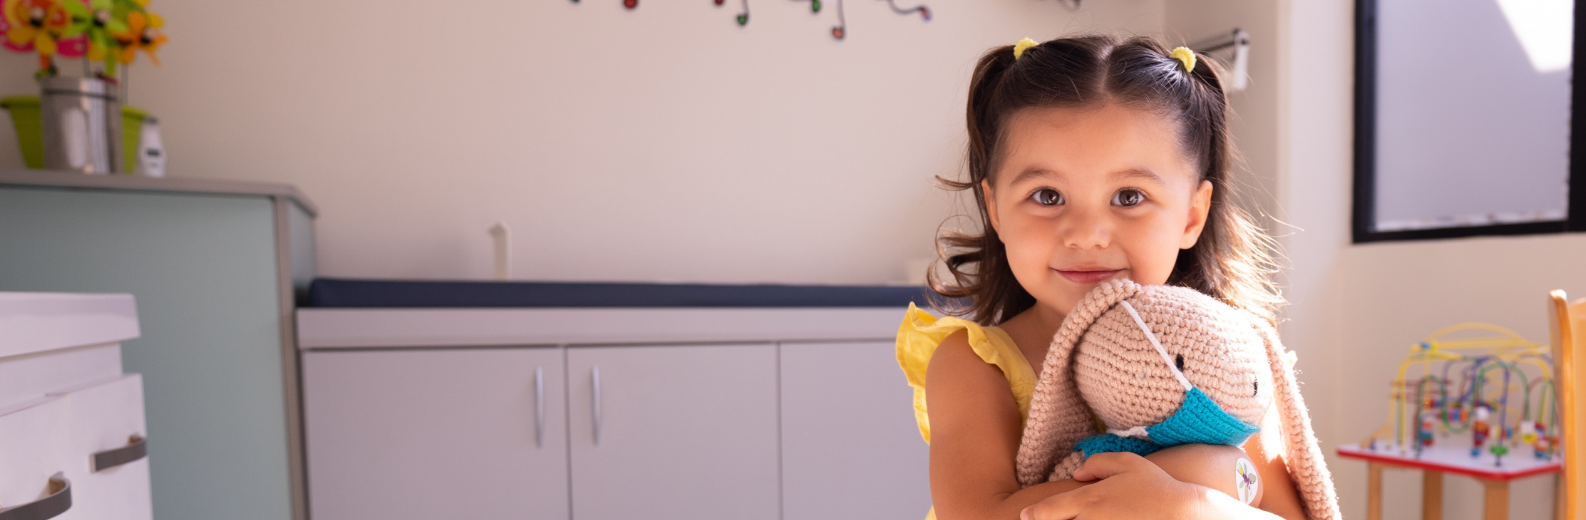 Young girl smiles at camera while holding a stuffed bunny in a pediatric office